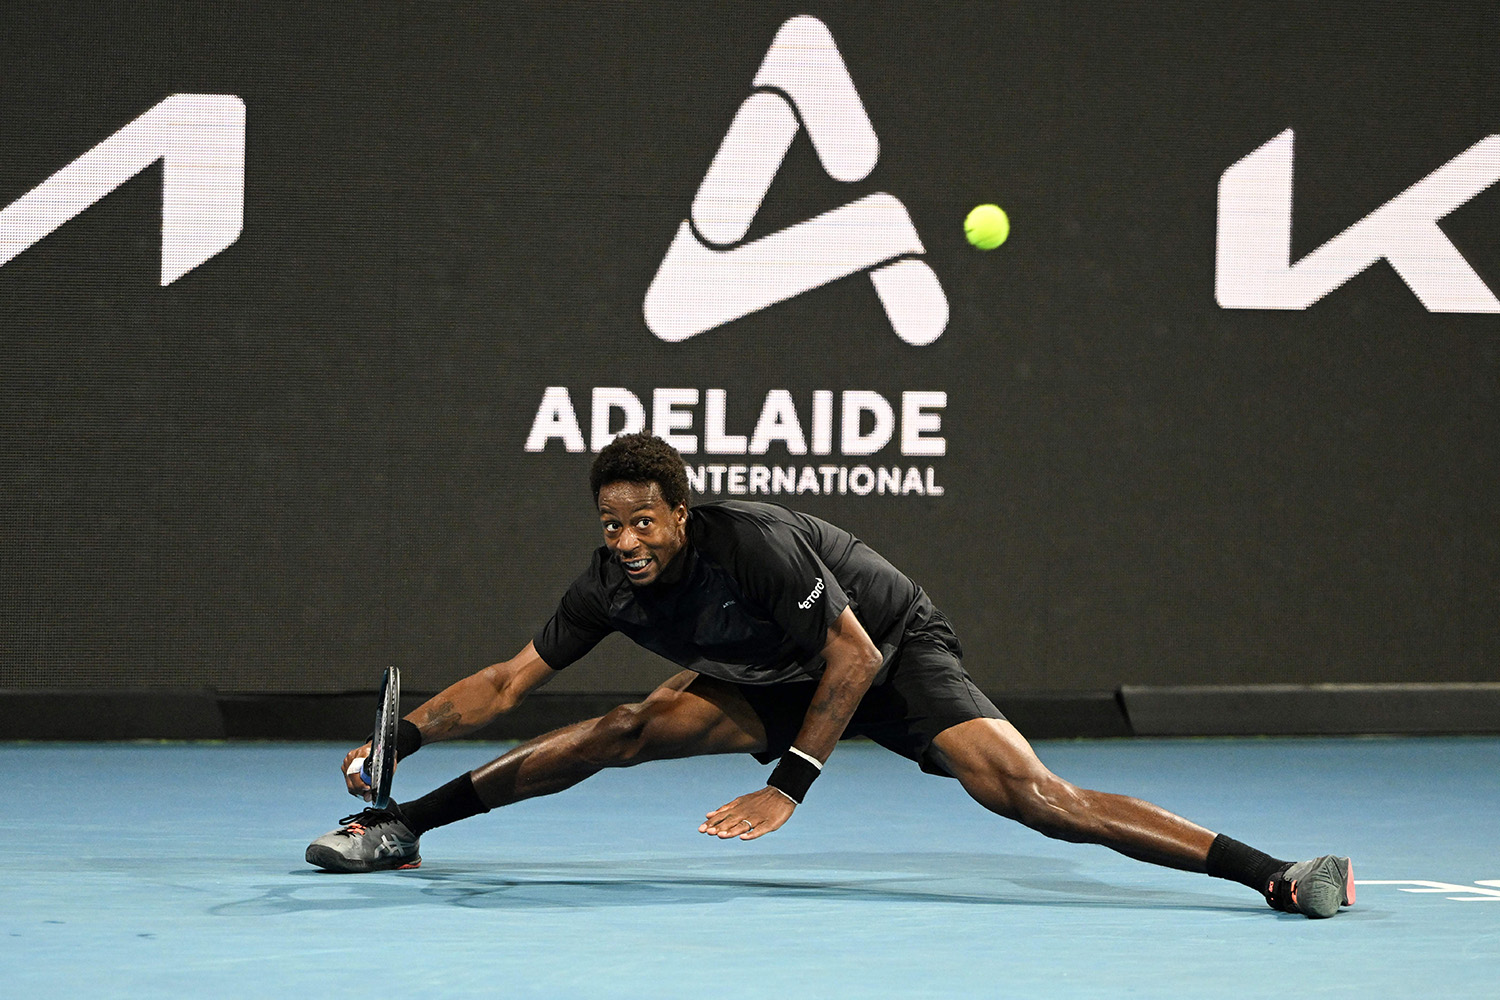 Gael Monfils defended brilliantly during his semifinal victory over Thanasi Kokkinakis at the Adelaide International